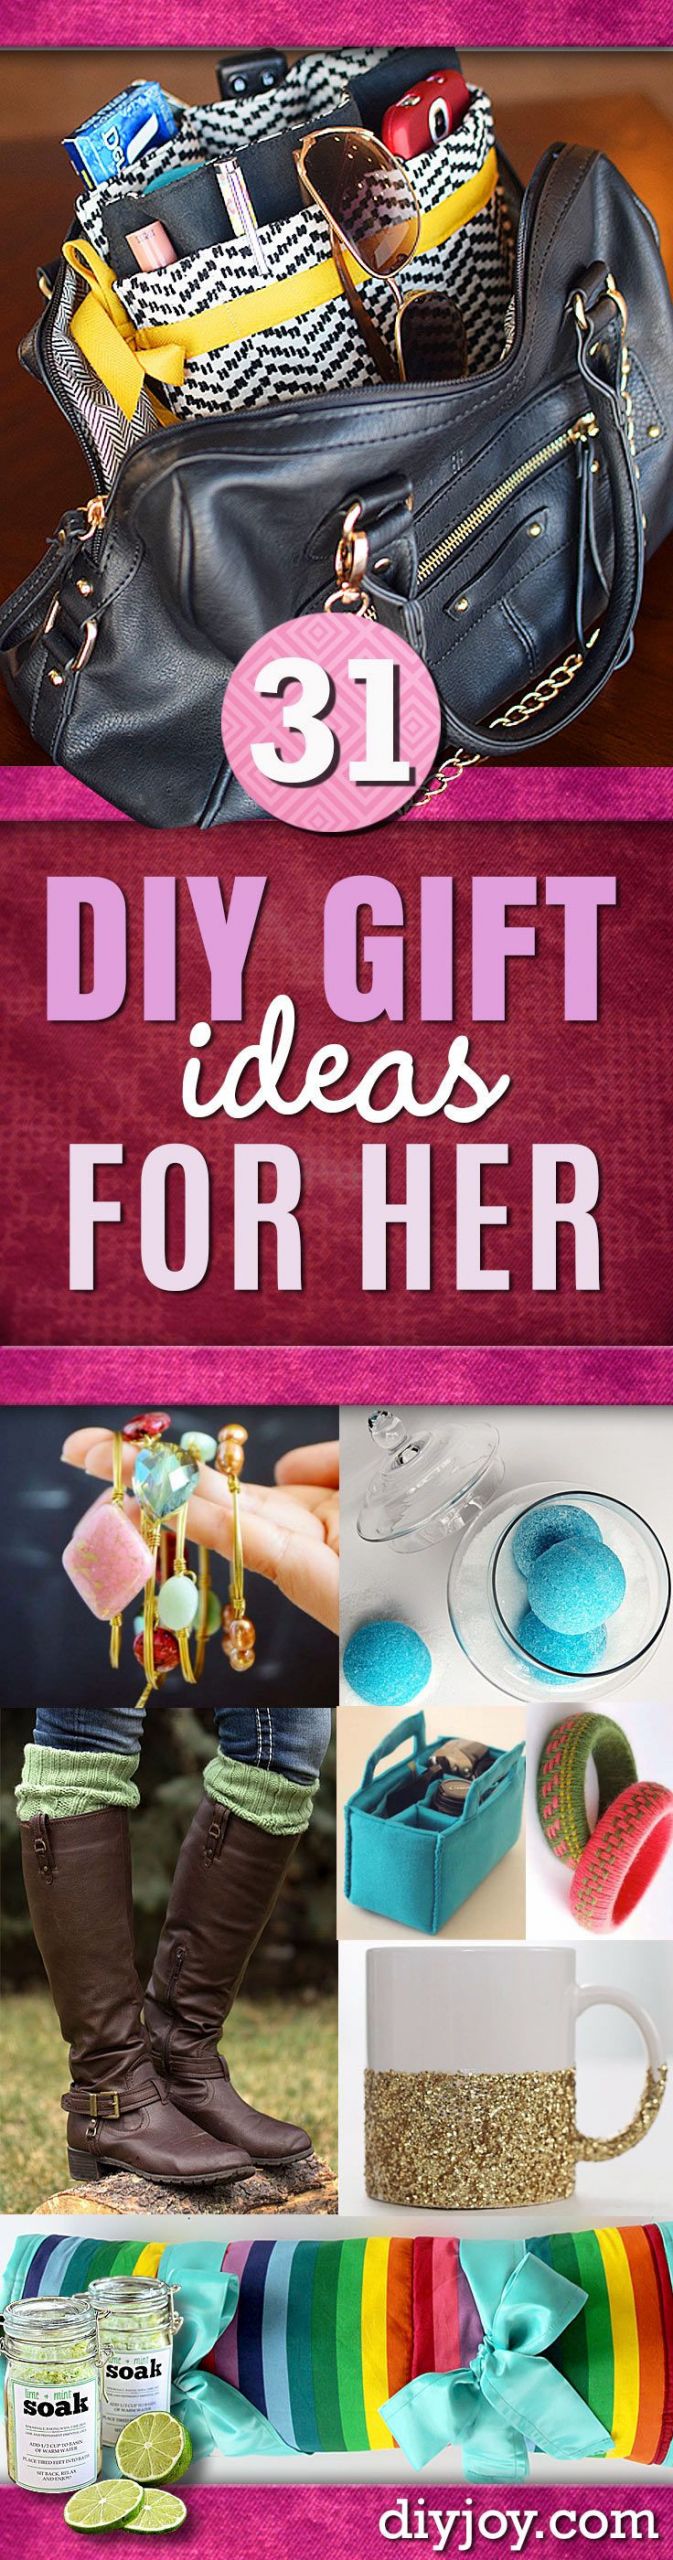 Gift Ideas For My Girlfriends Birthday
 Super Special DIY Gift Ideas for Her DIY JOY